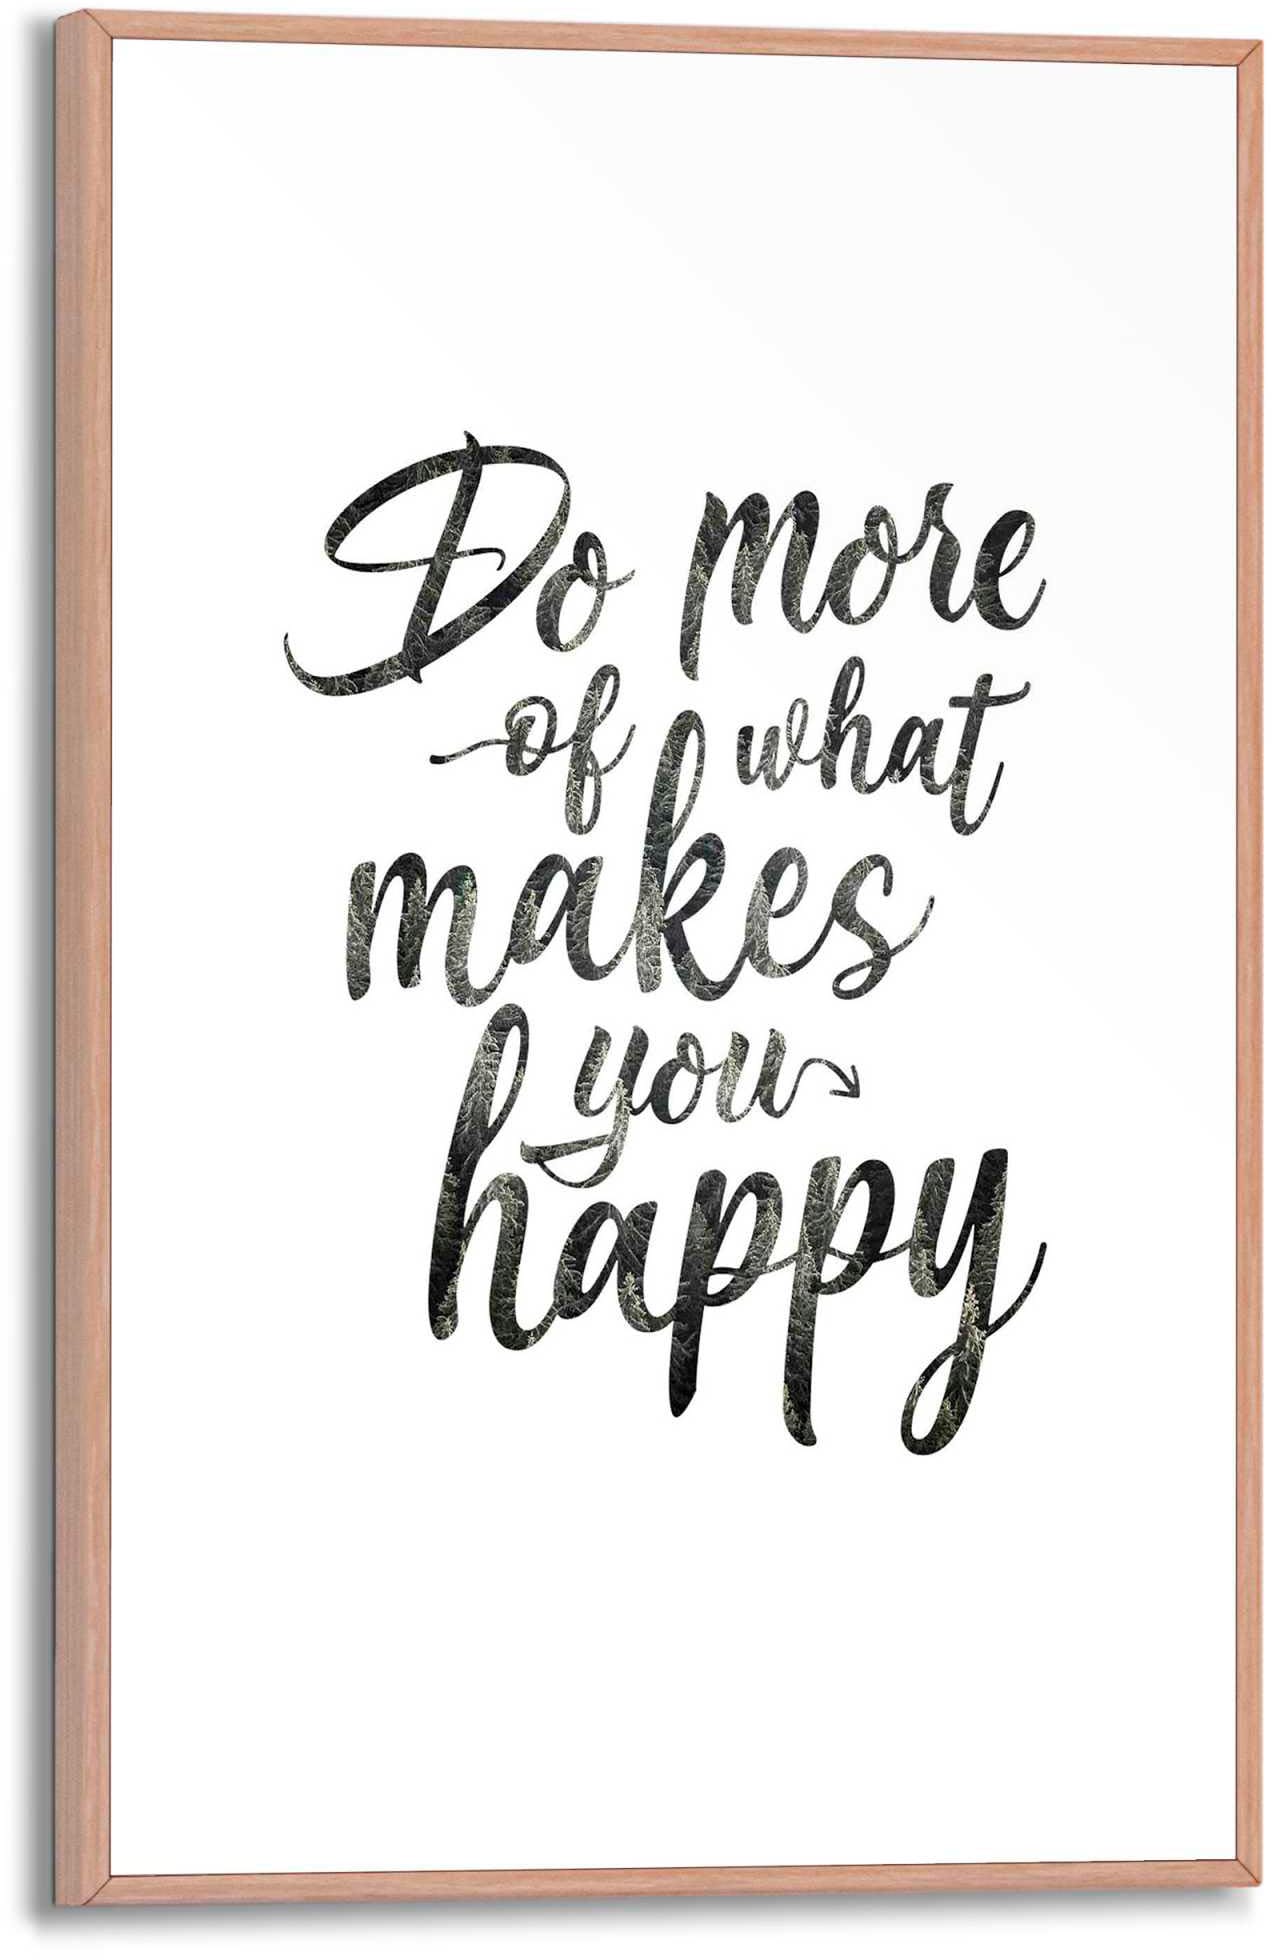 Reinders Poster "Do more of what makes you happy" von Reinders!